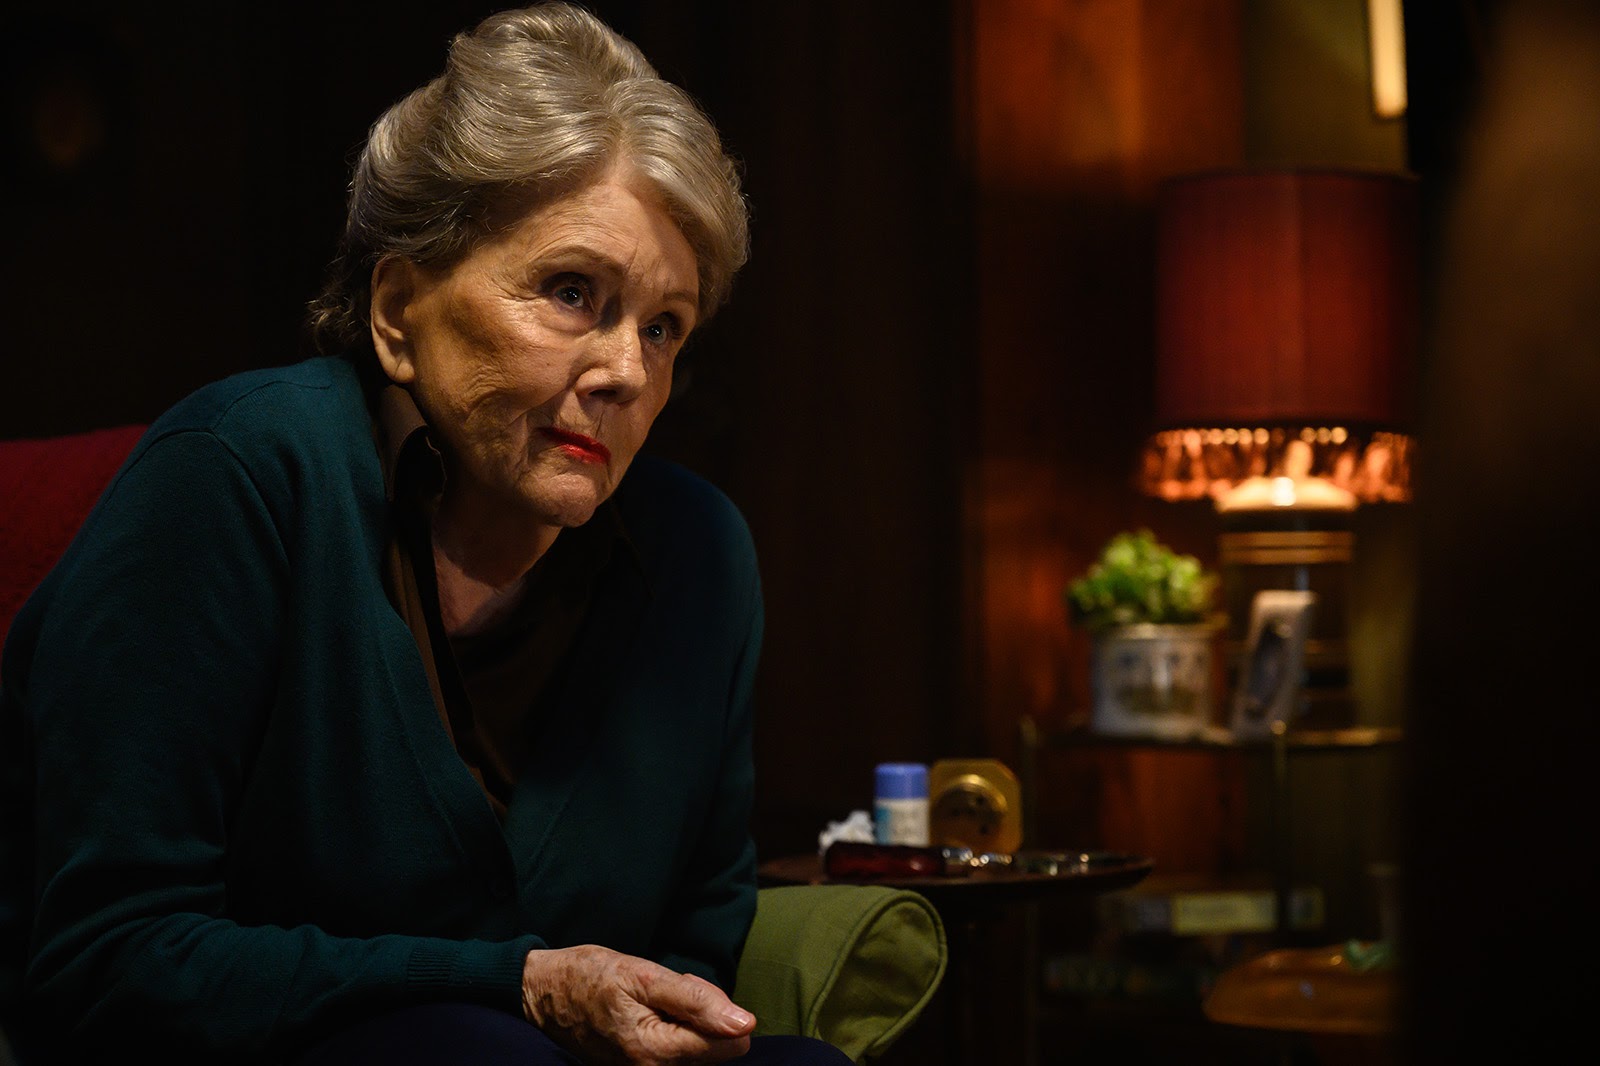 The late Dame Diana Rigg as Ms. Collins in Last Night in Soho. Image © Focus Features